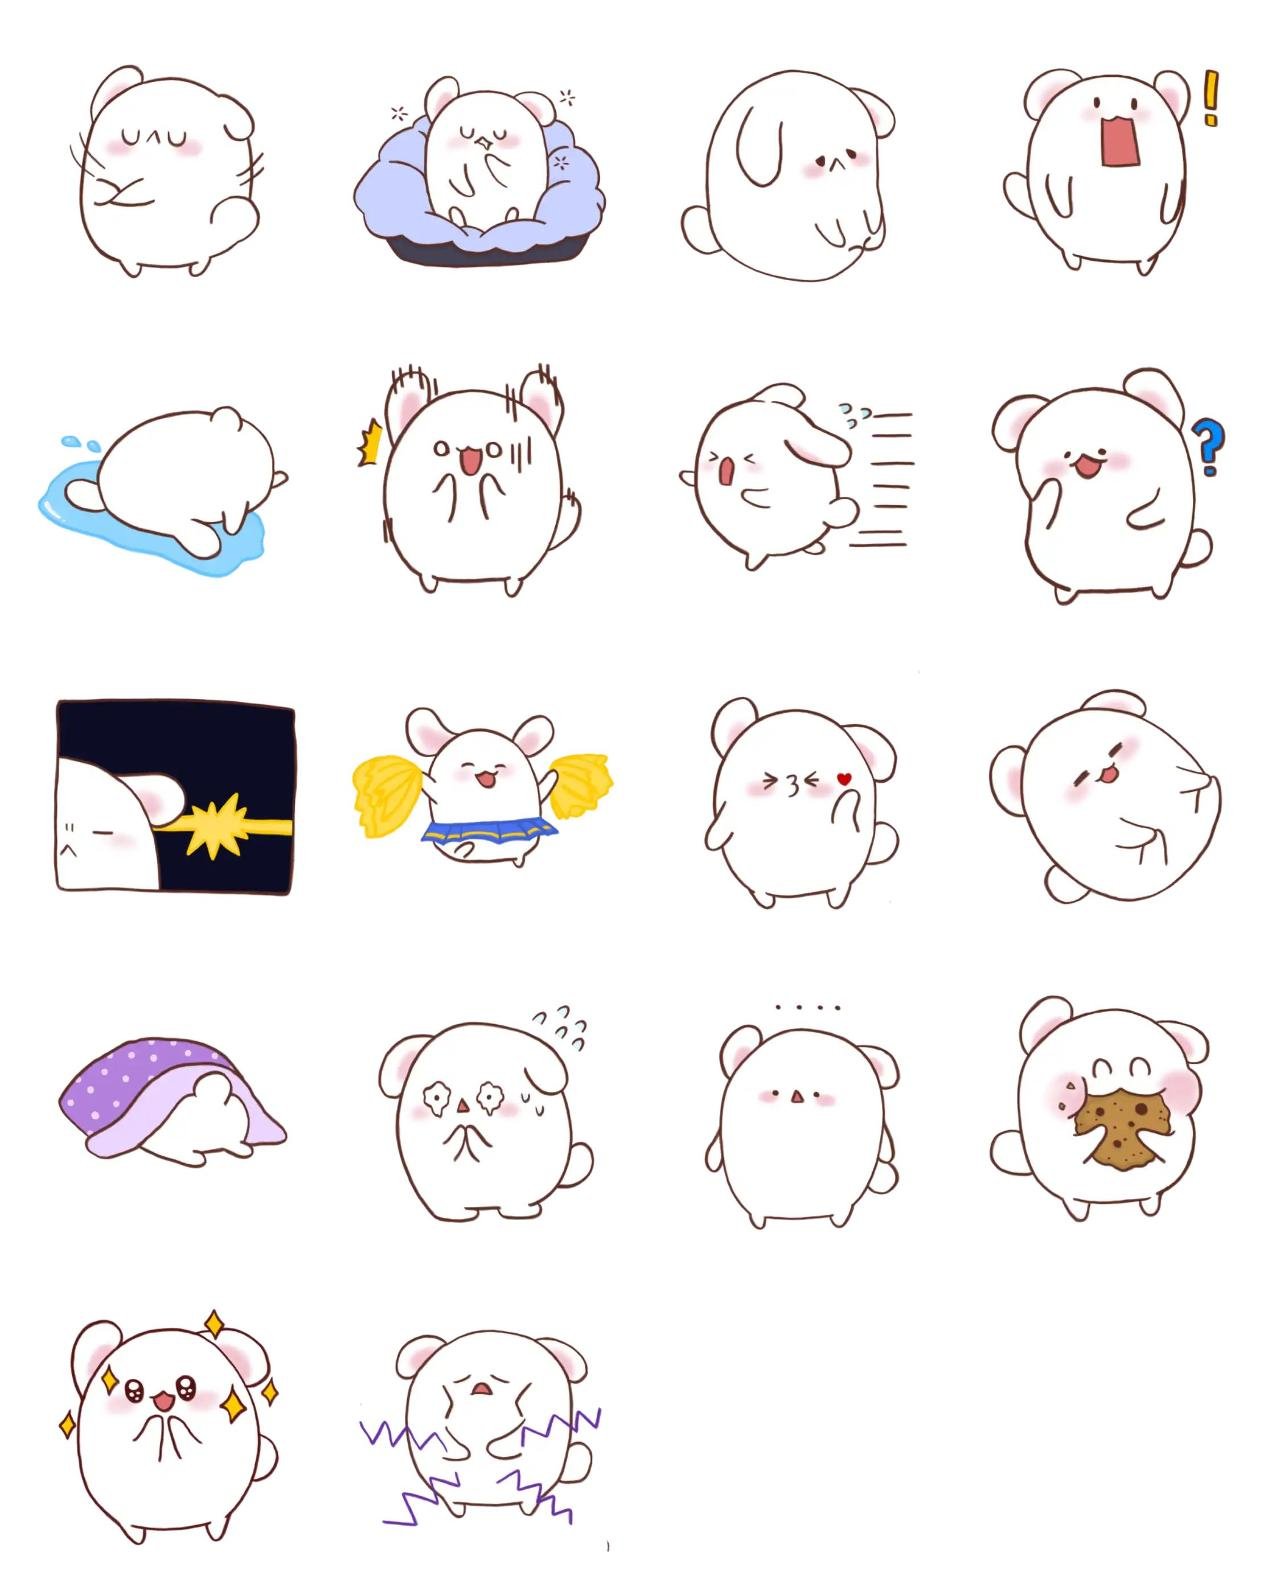 Koko 2 Animation/Cartoon,Animals sticker pack for Whatsapp, Telegram, Signal, and others chatting and message apps